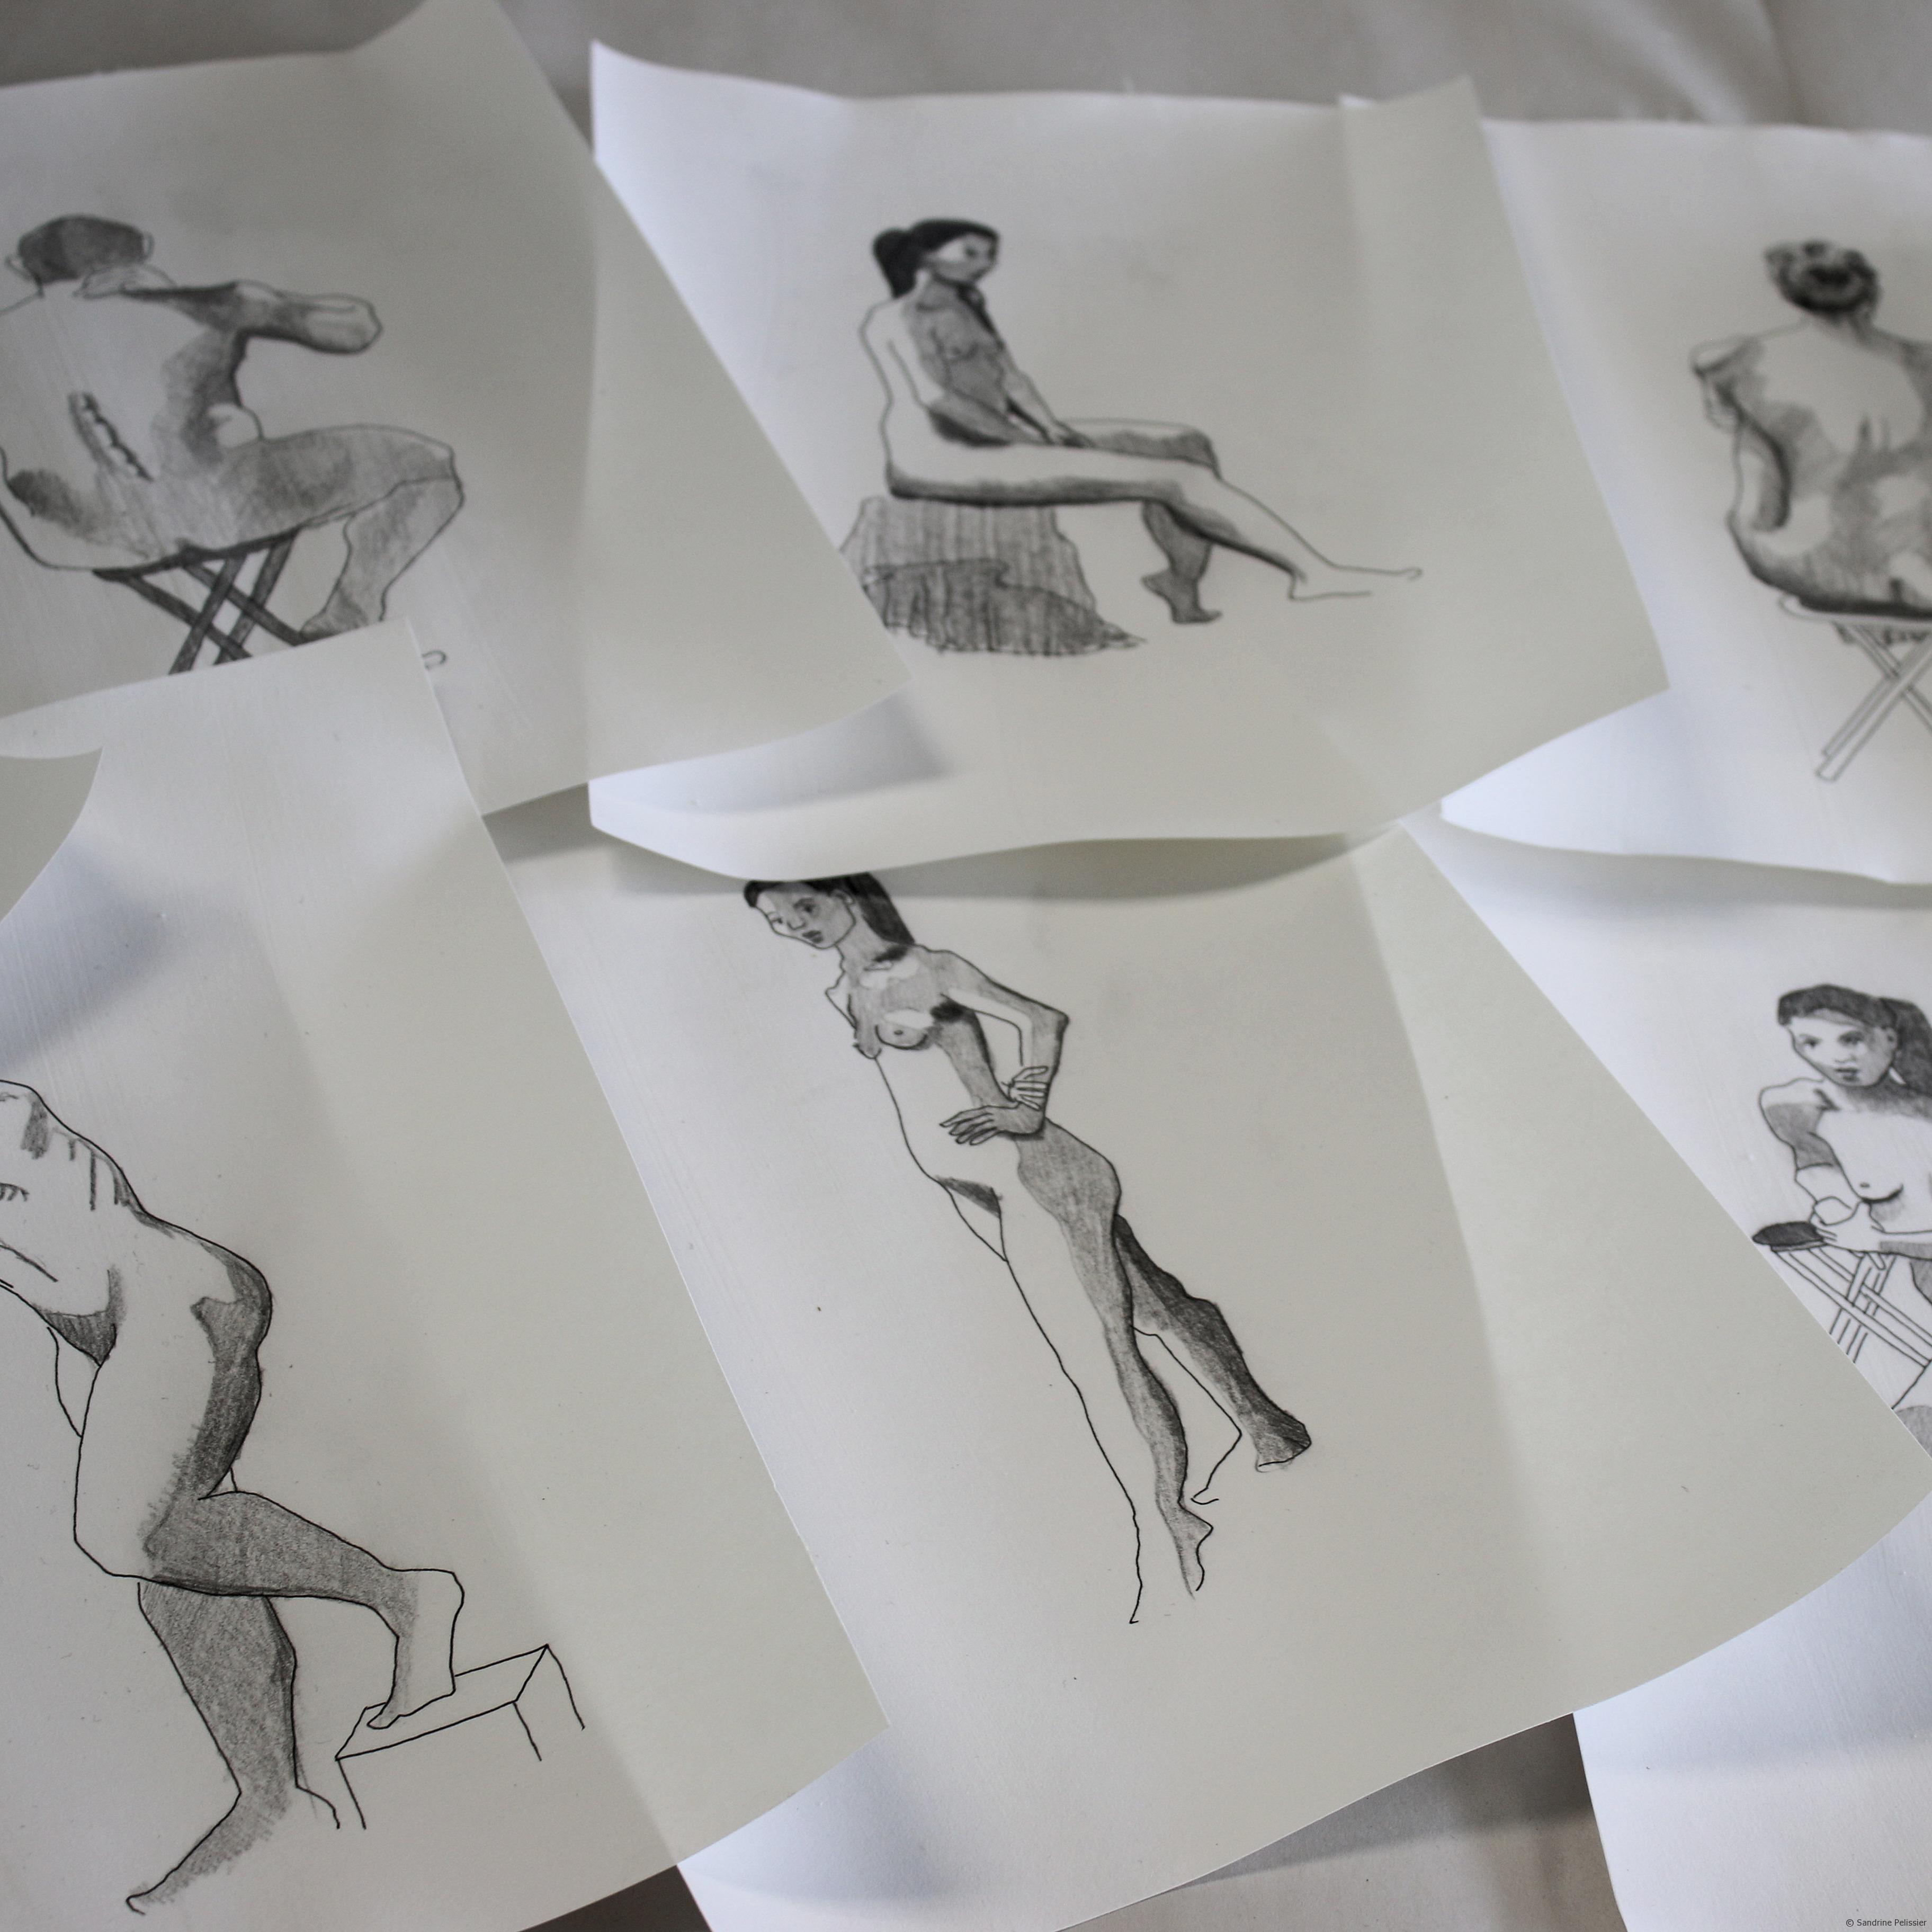 Life drawing techniques and methods, a quick overview